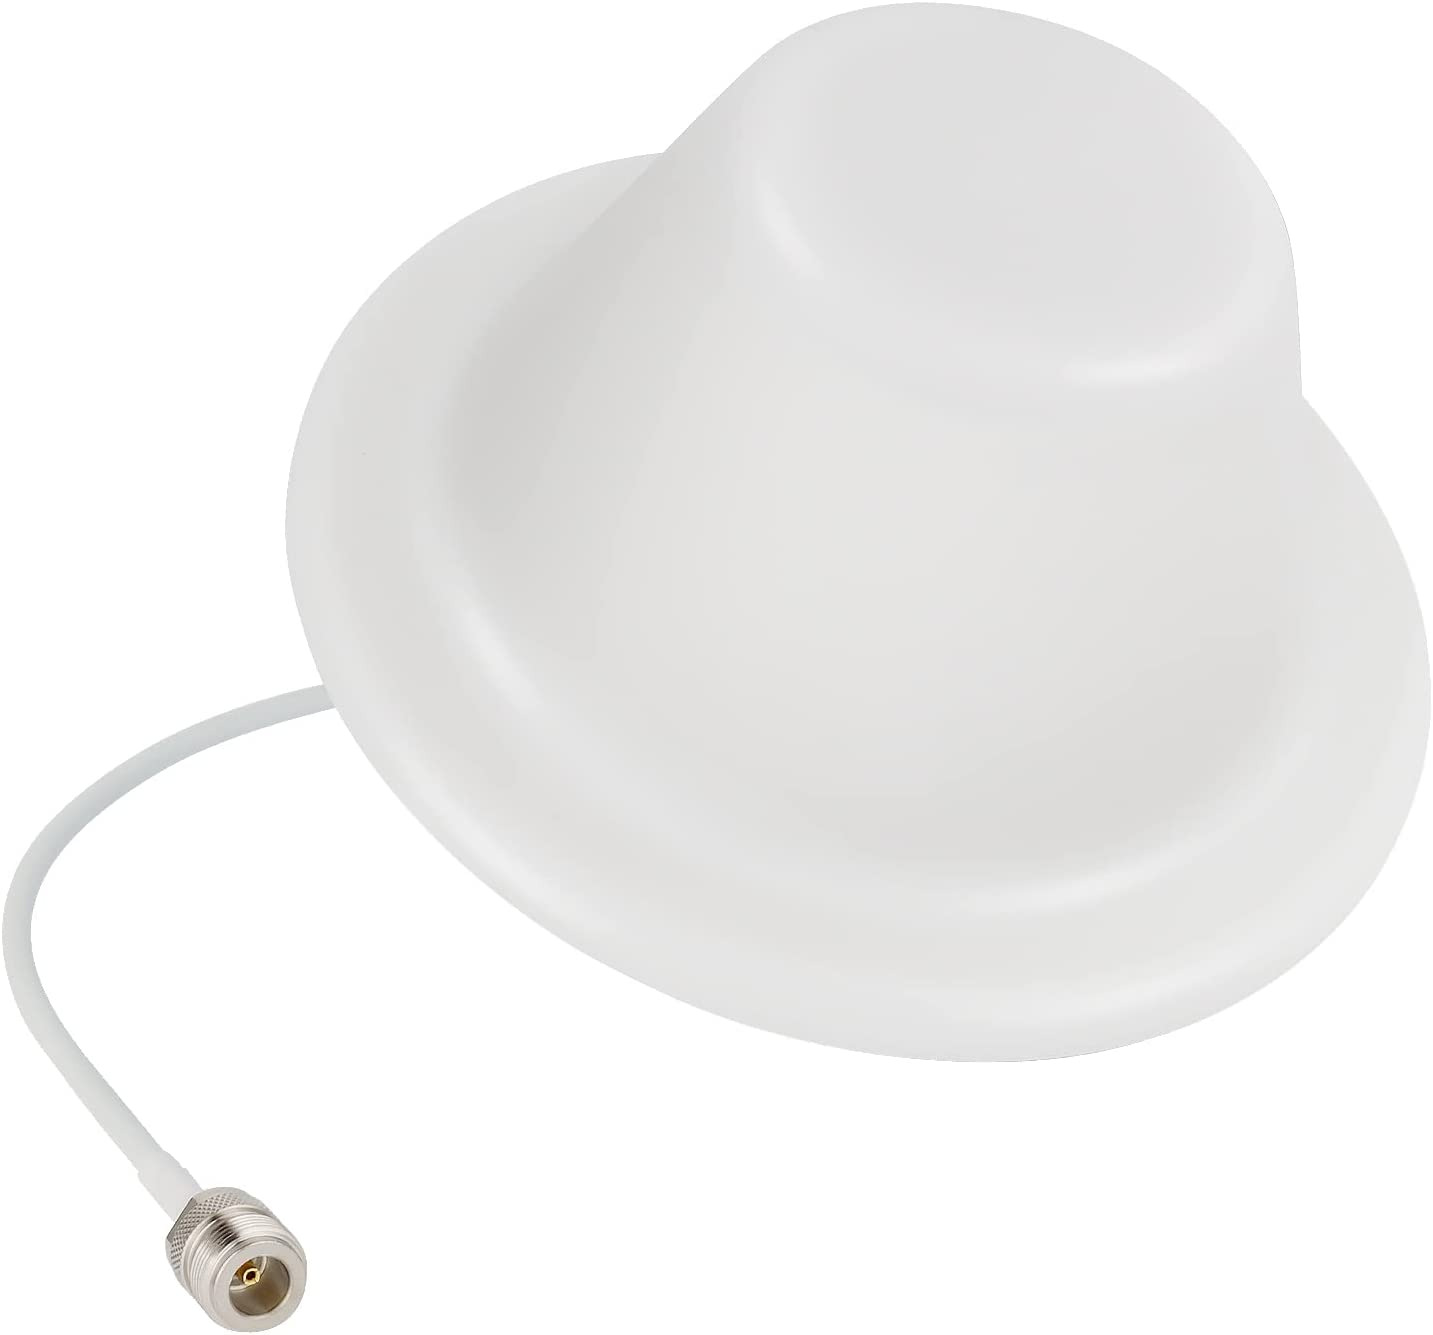 Dome Ceiling Antenna, XRDS-RF Omnidirectional Indoor Antenna 3G/4G/GSM/LTE High